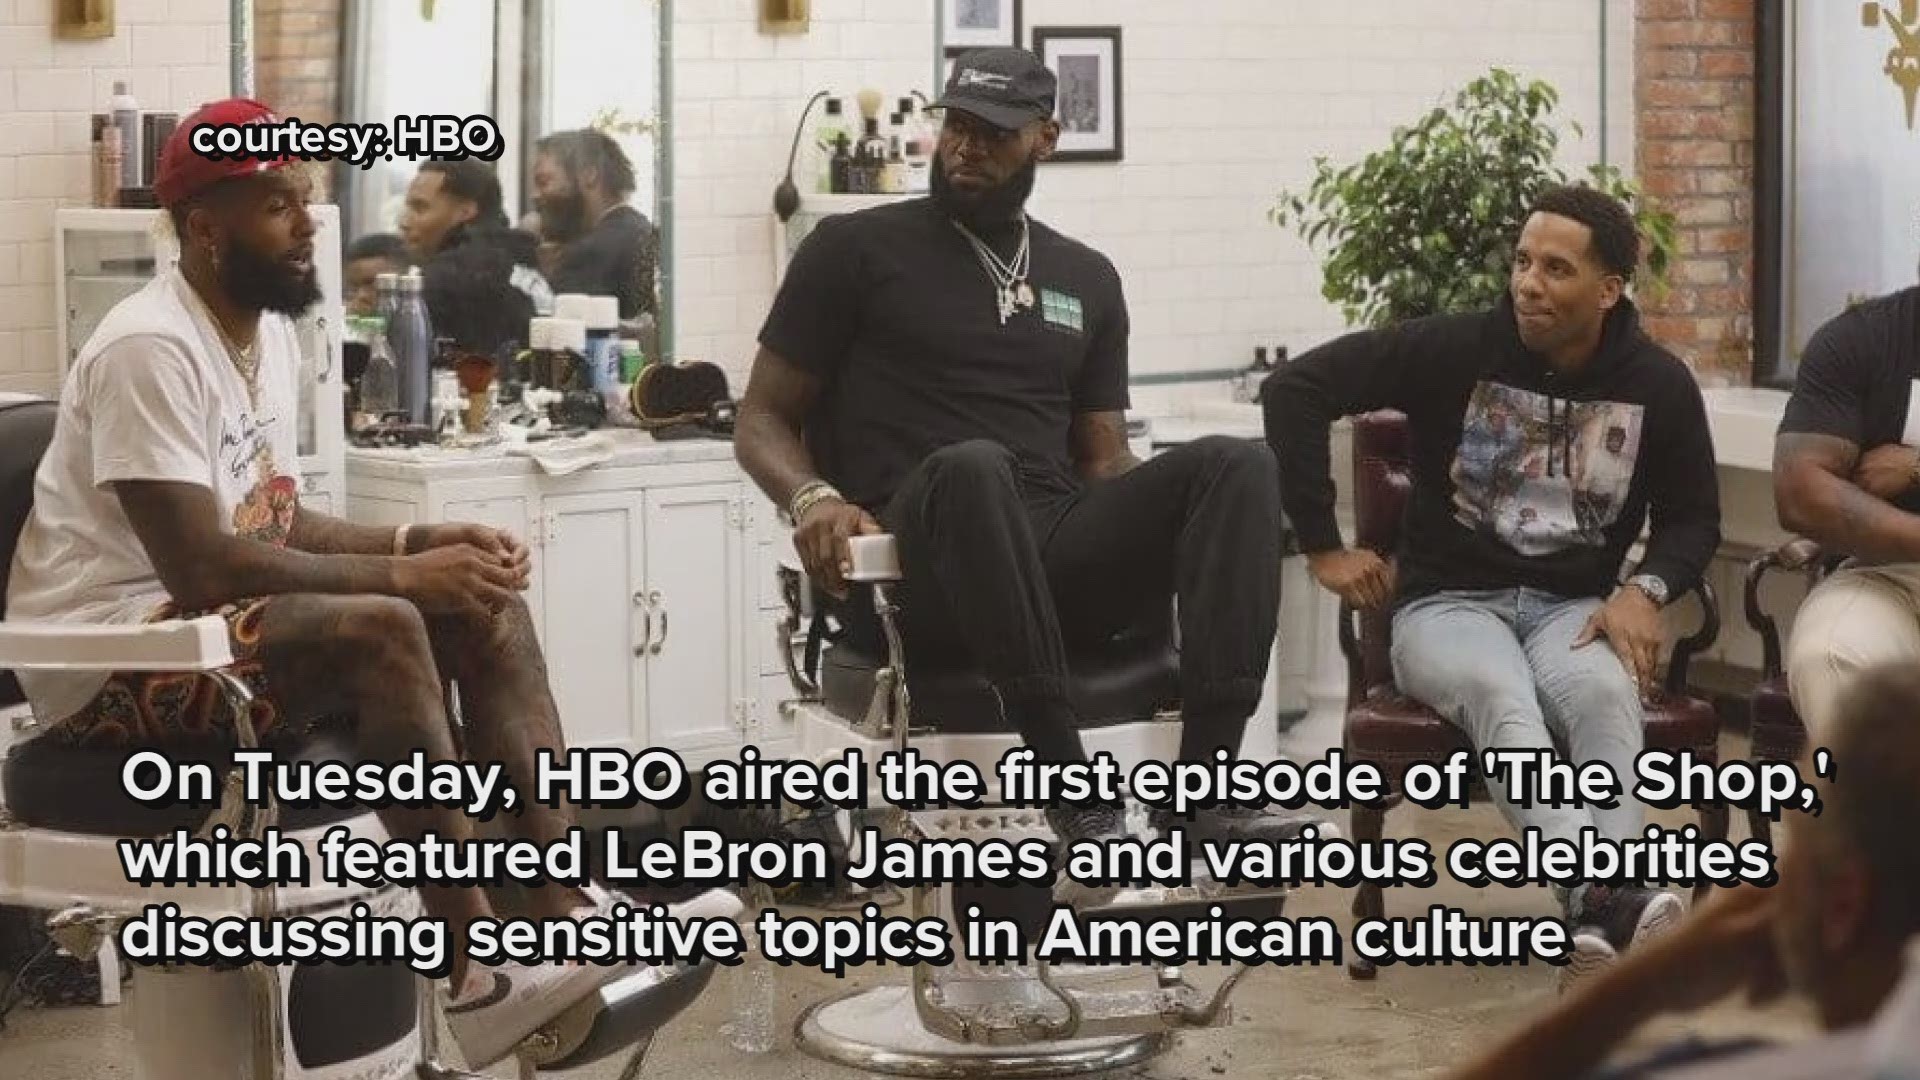 LeBron James discusses race, early days at St. Vincent-St. Mary on 'The Shop'